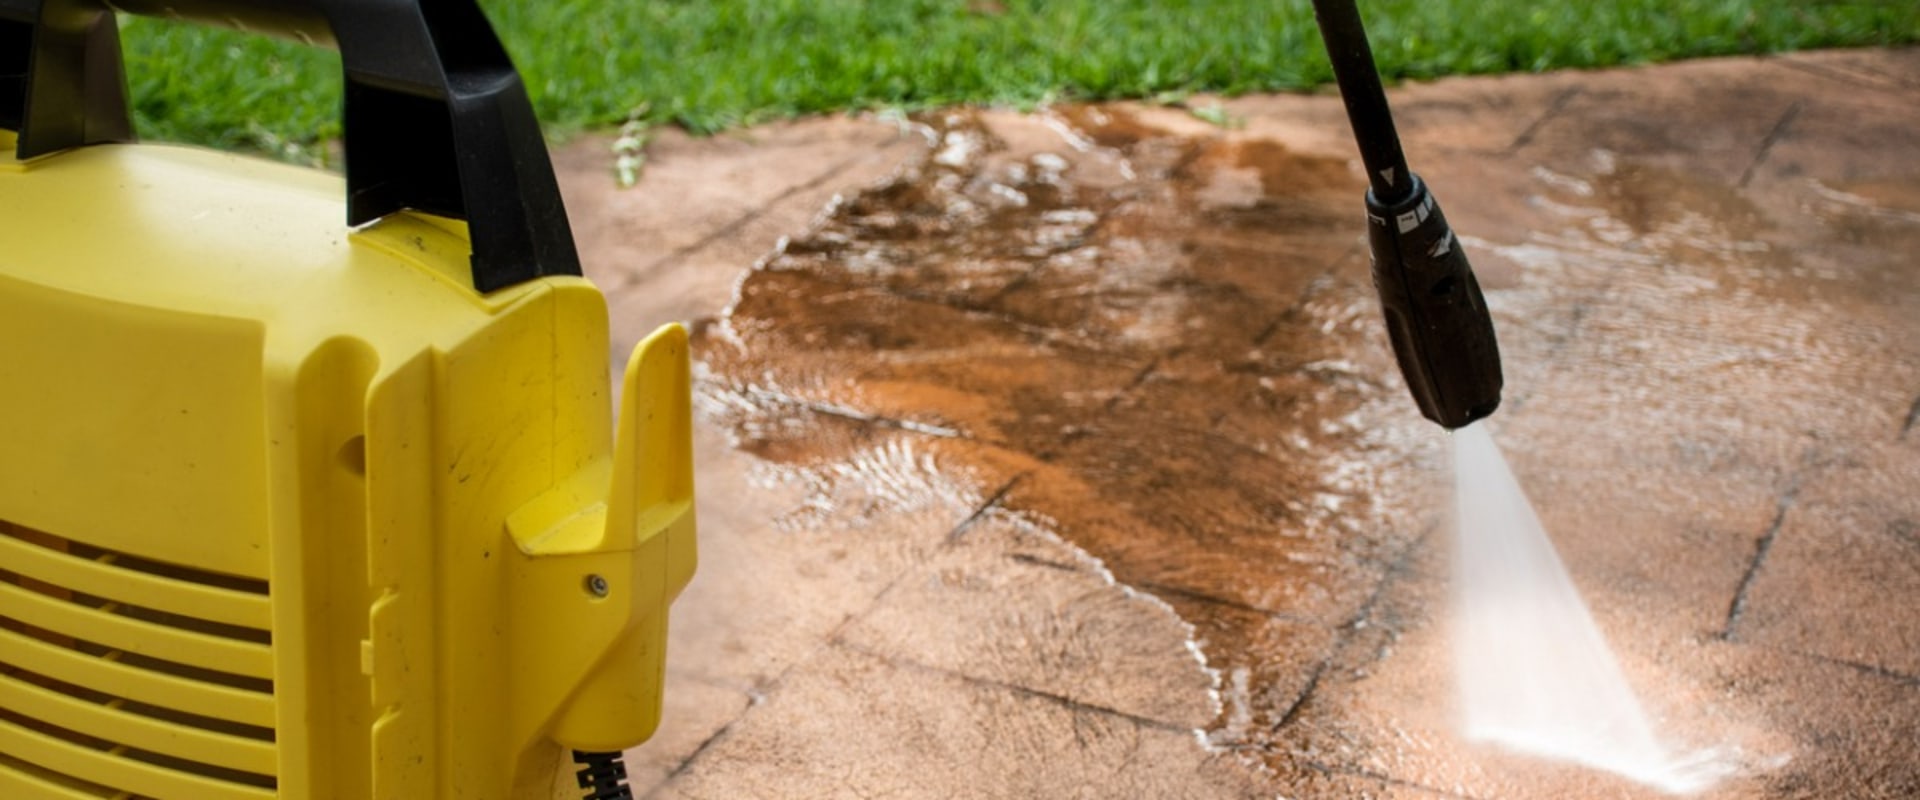 Are there any special considerations when using an electric-powered pressure washer?